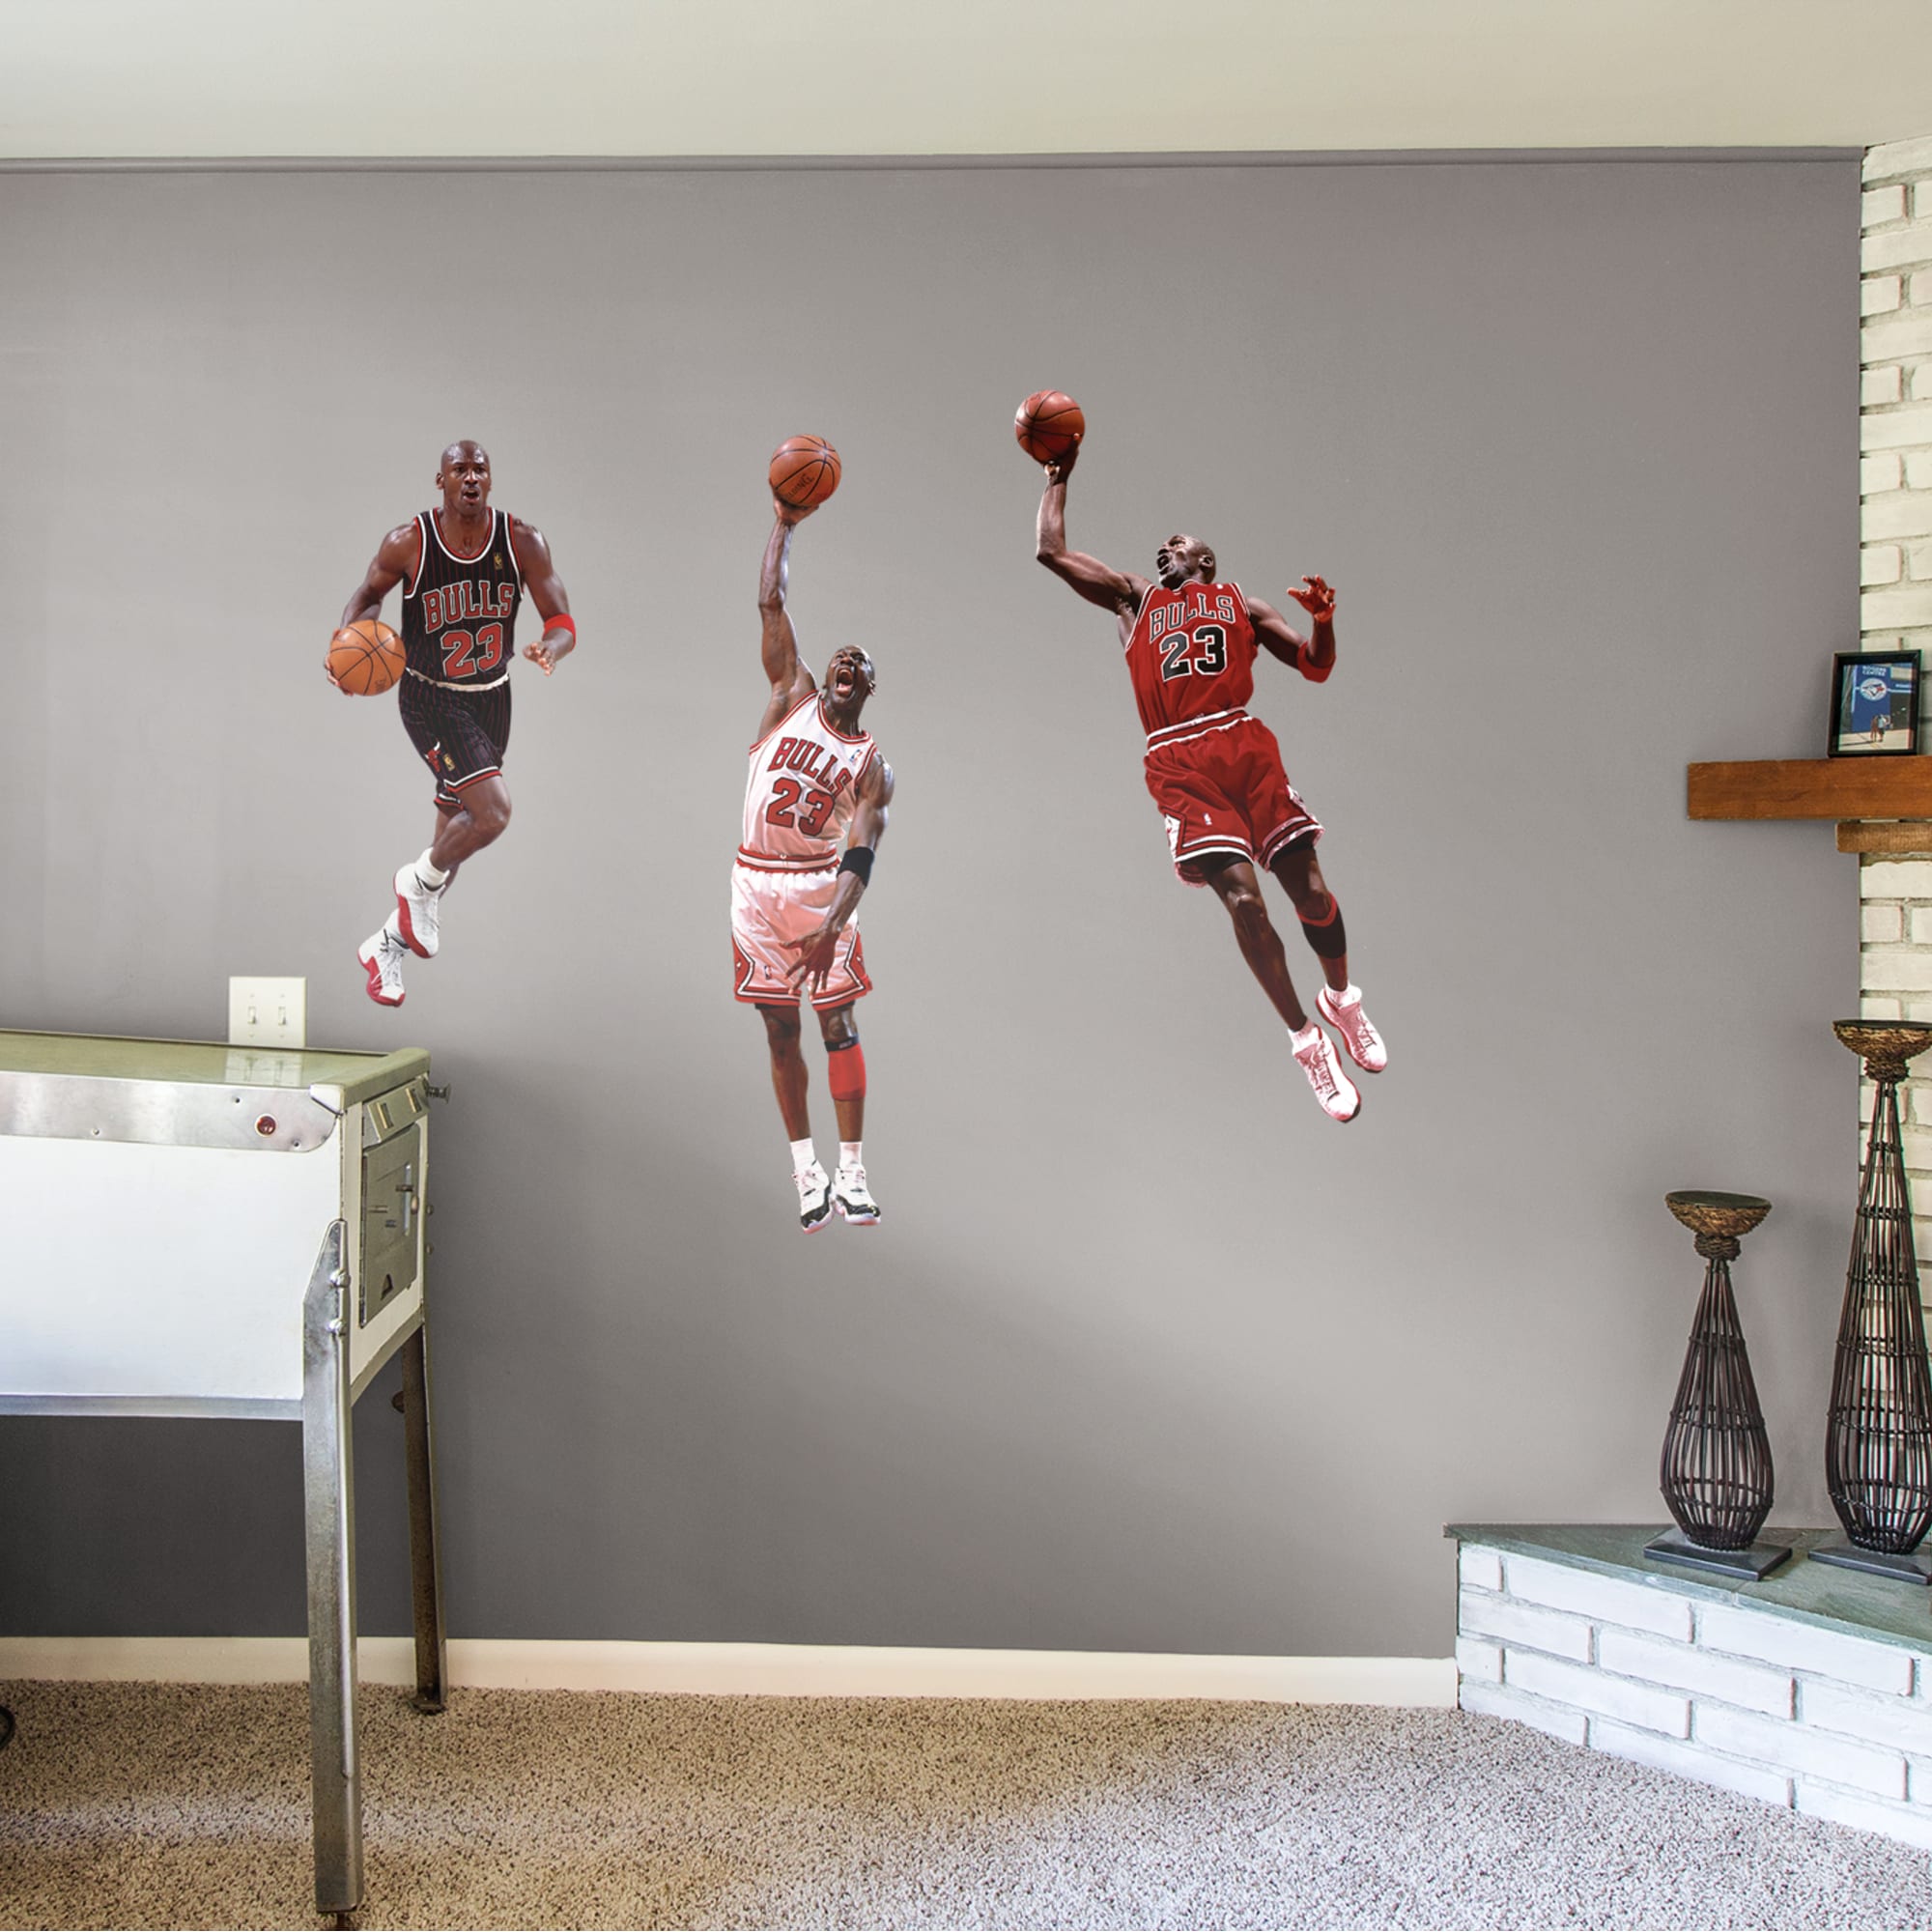 Michael Jordan for Chicago Bulls: Hero Pack - Officially Licensed NBA Removable Wall Decal 39.5"W x 52.0"H by Fathead | Vinyl